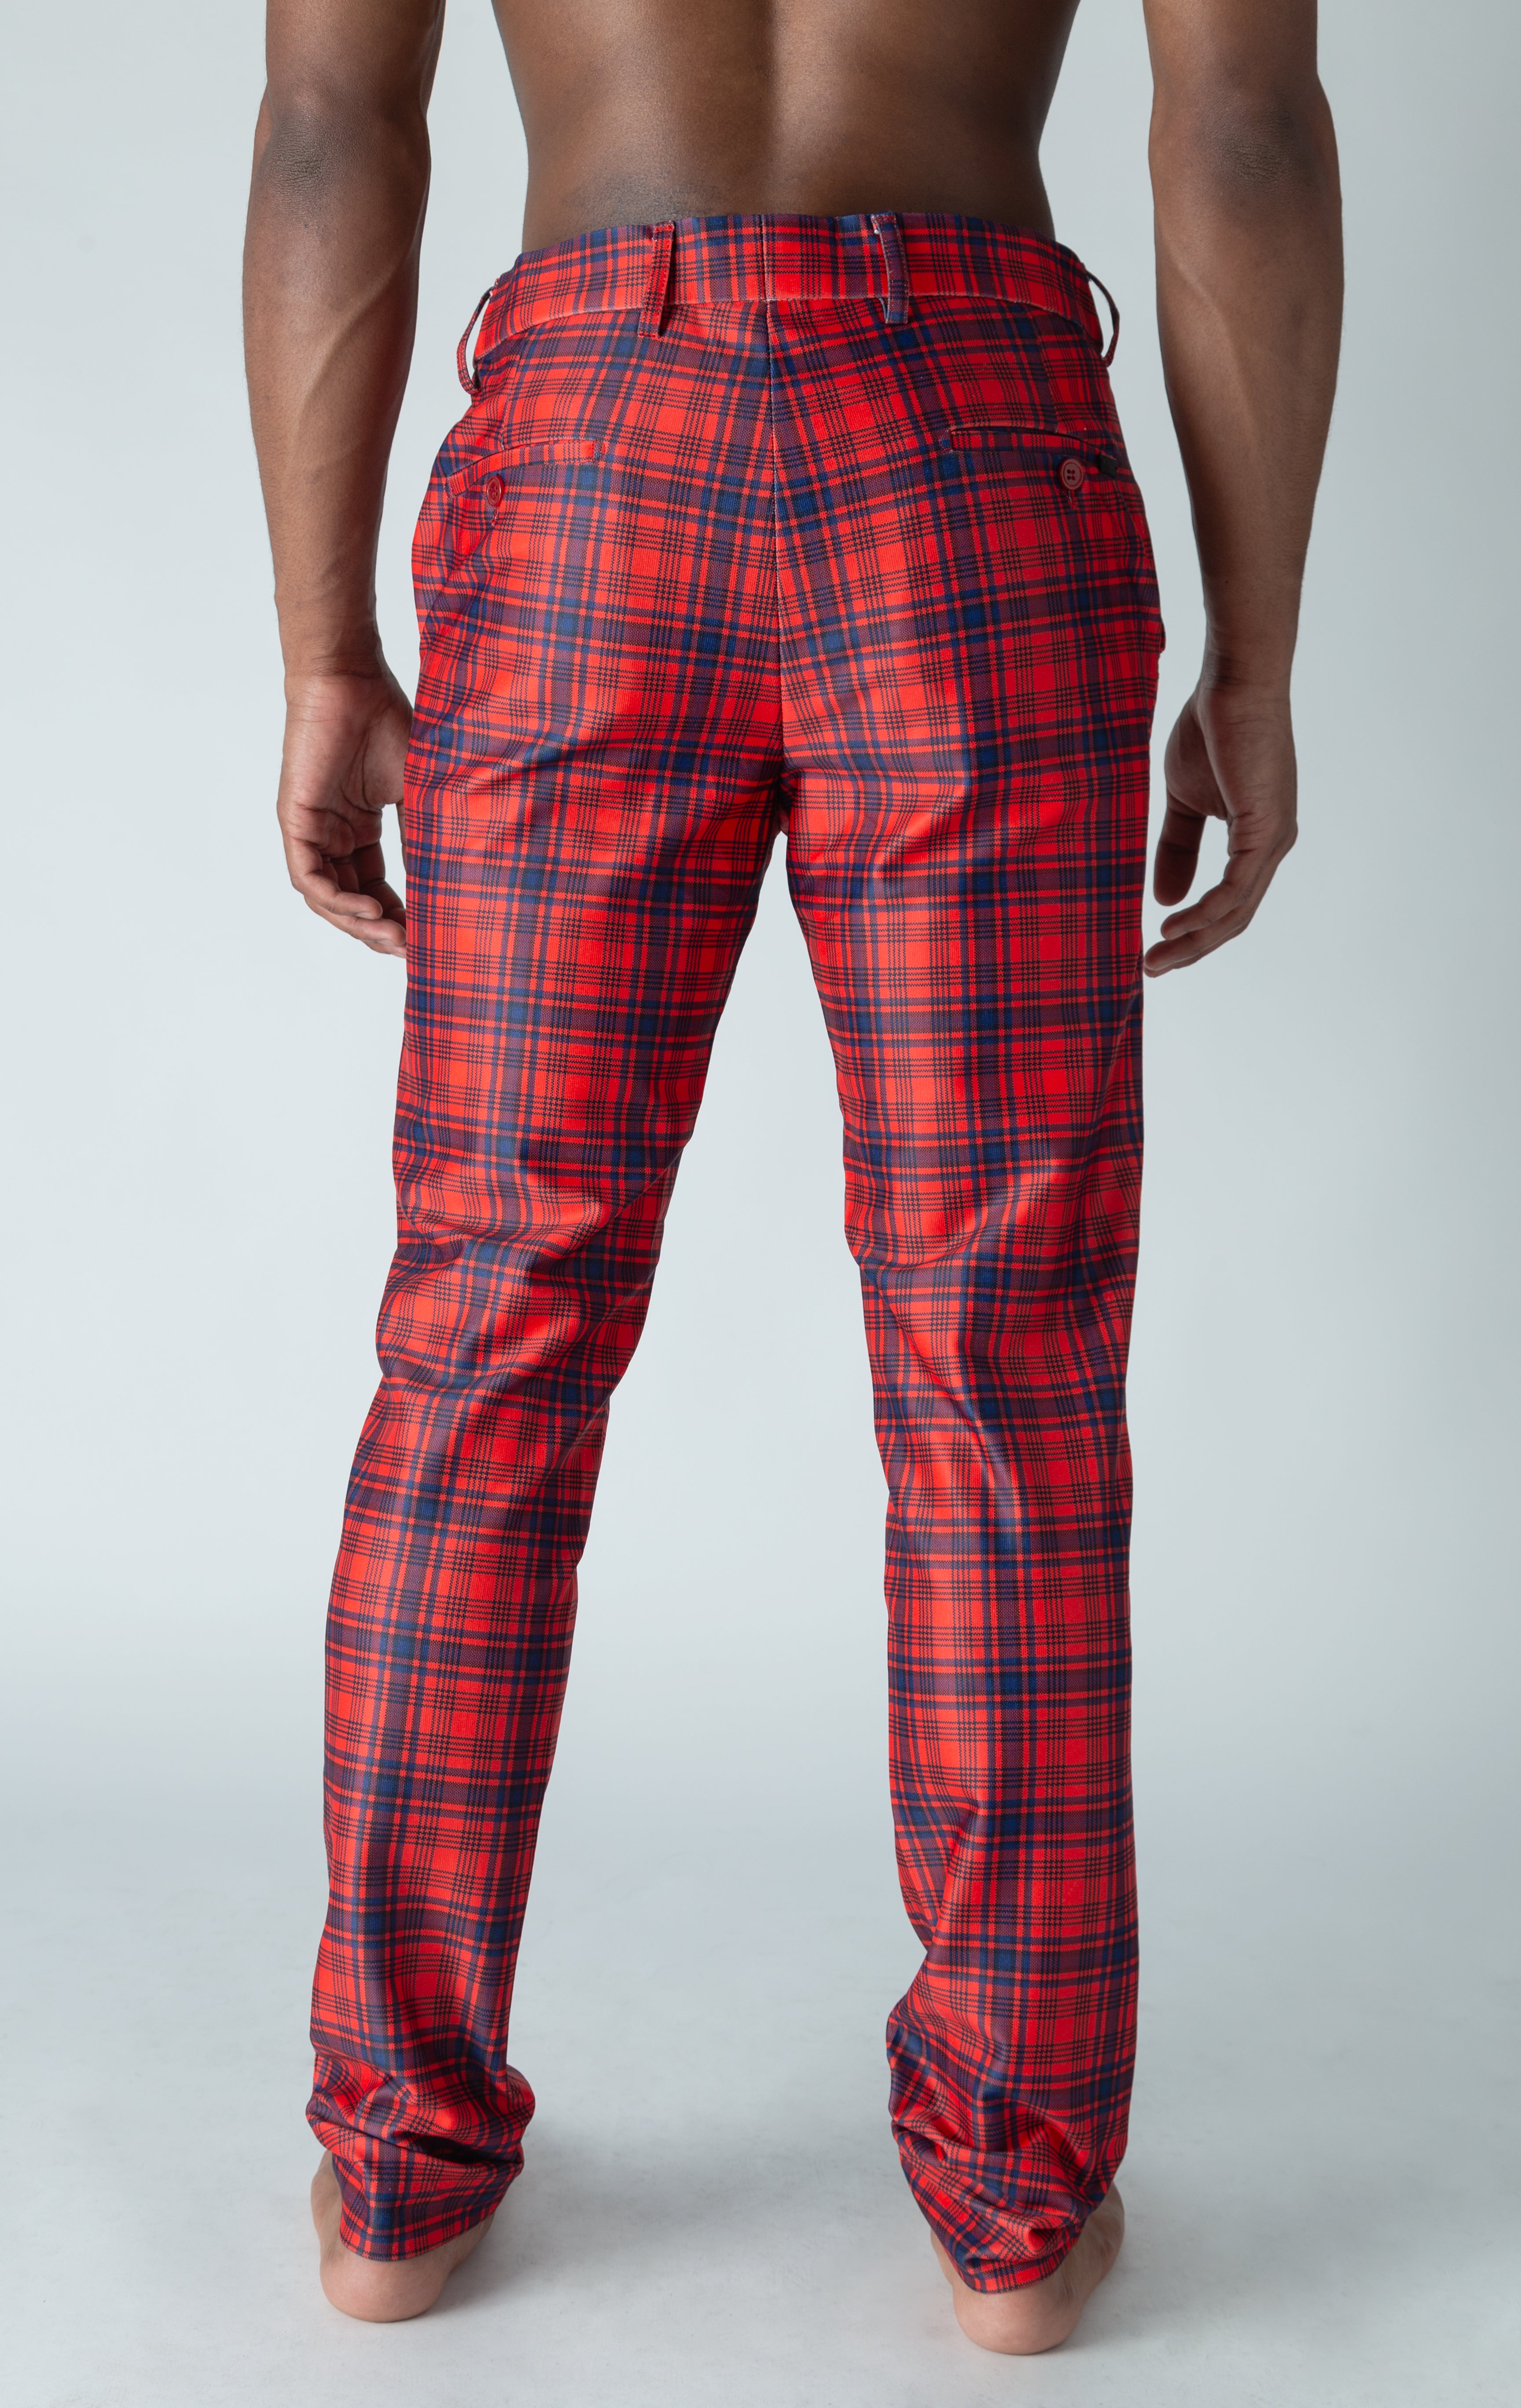 Men's red chino pants with a checkered plaid design. The pants feature an elastic waistband for comfort and stretch, and are made from a lightweight cotton-spandex blend fabric. Inseam is 32 inches.